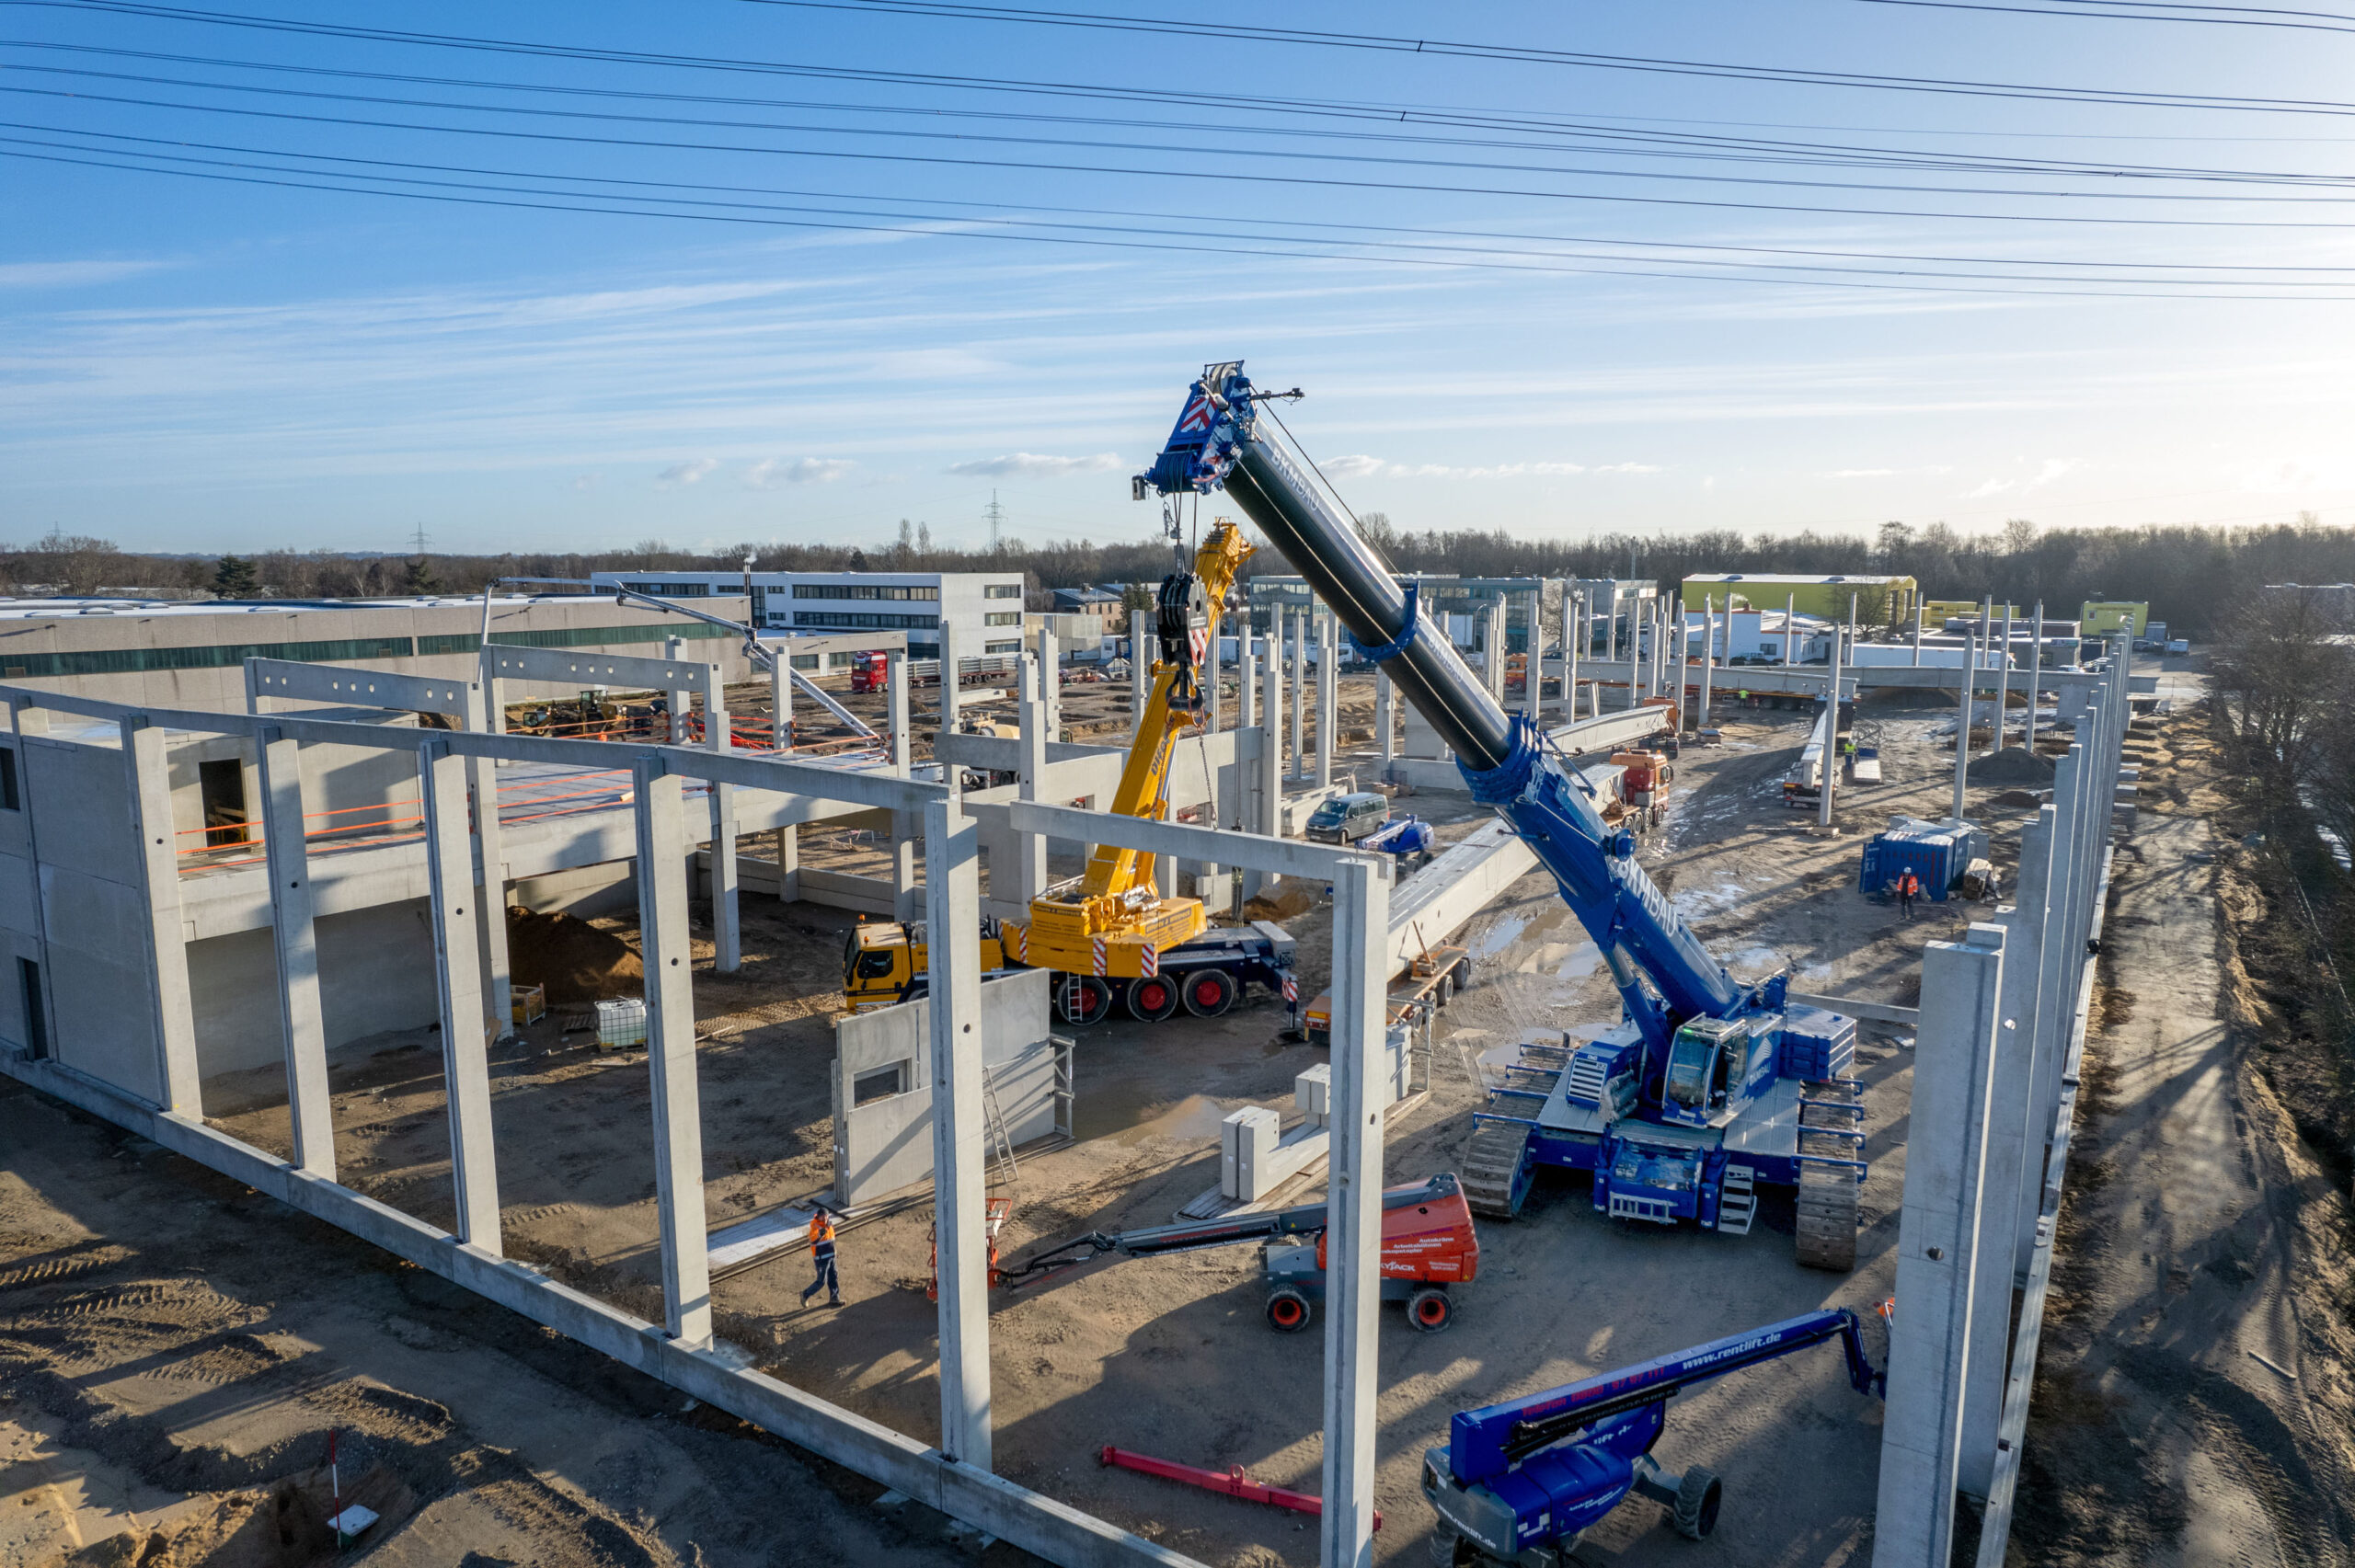 Powerful performance: the LTR 1220 installed 900 precast concrete elements on the construction site in Norderstedt, some of which had to be maneuvered only a short distance below two overhead power lines.